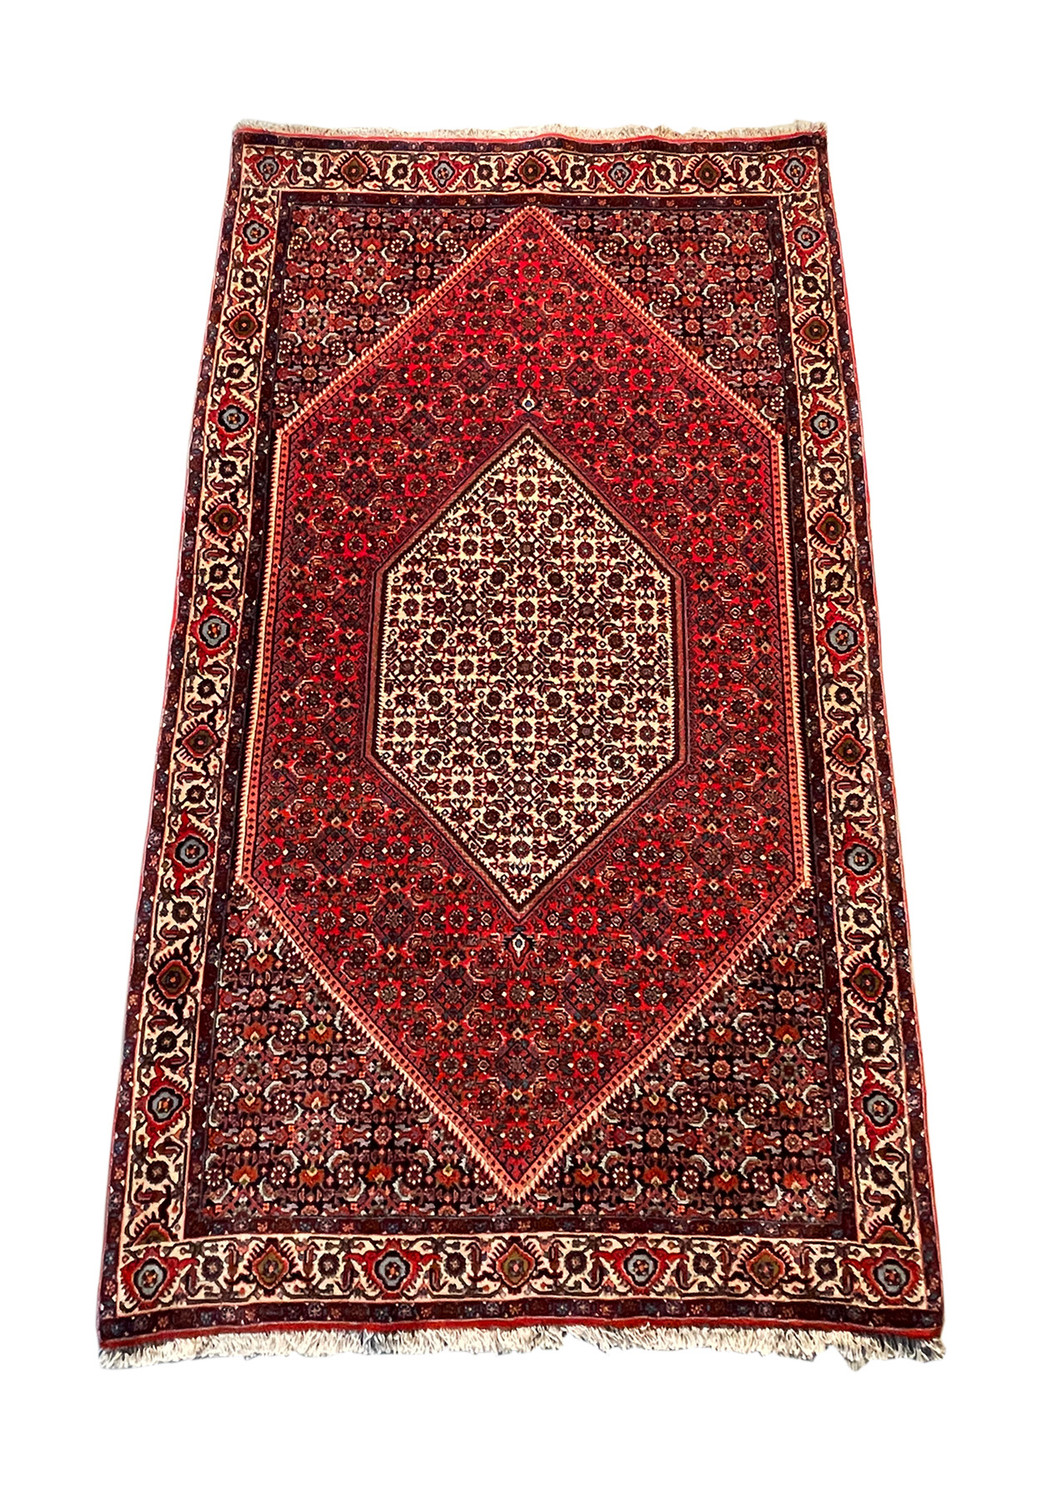 Overhead view of a 4x6 Persian Bijar rug showcasing a central diamond medallion with floral patterns in red, cream, and black hues